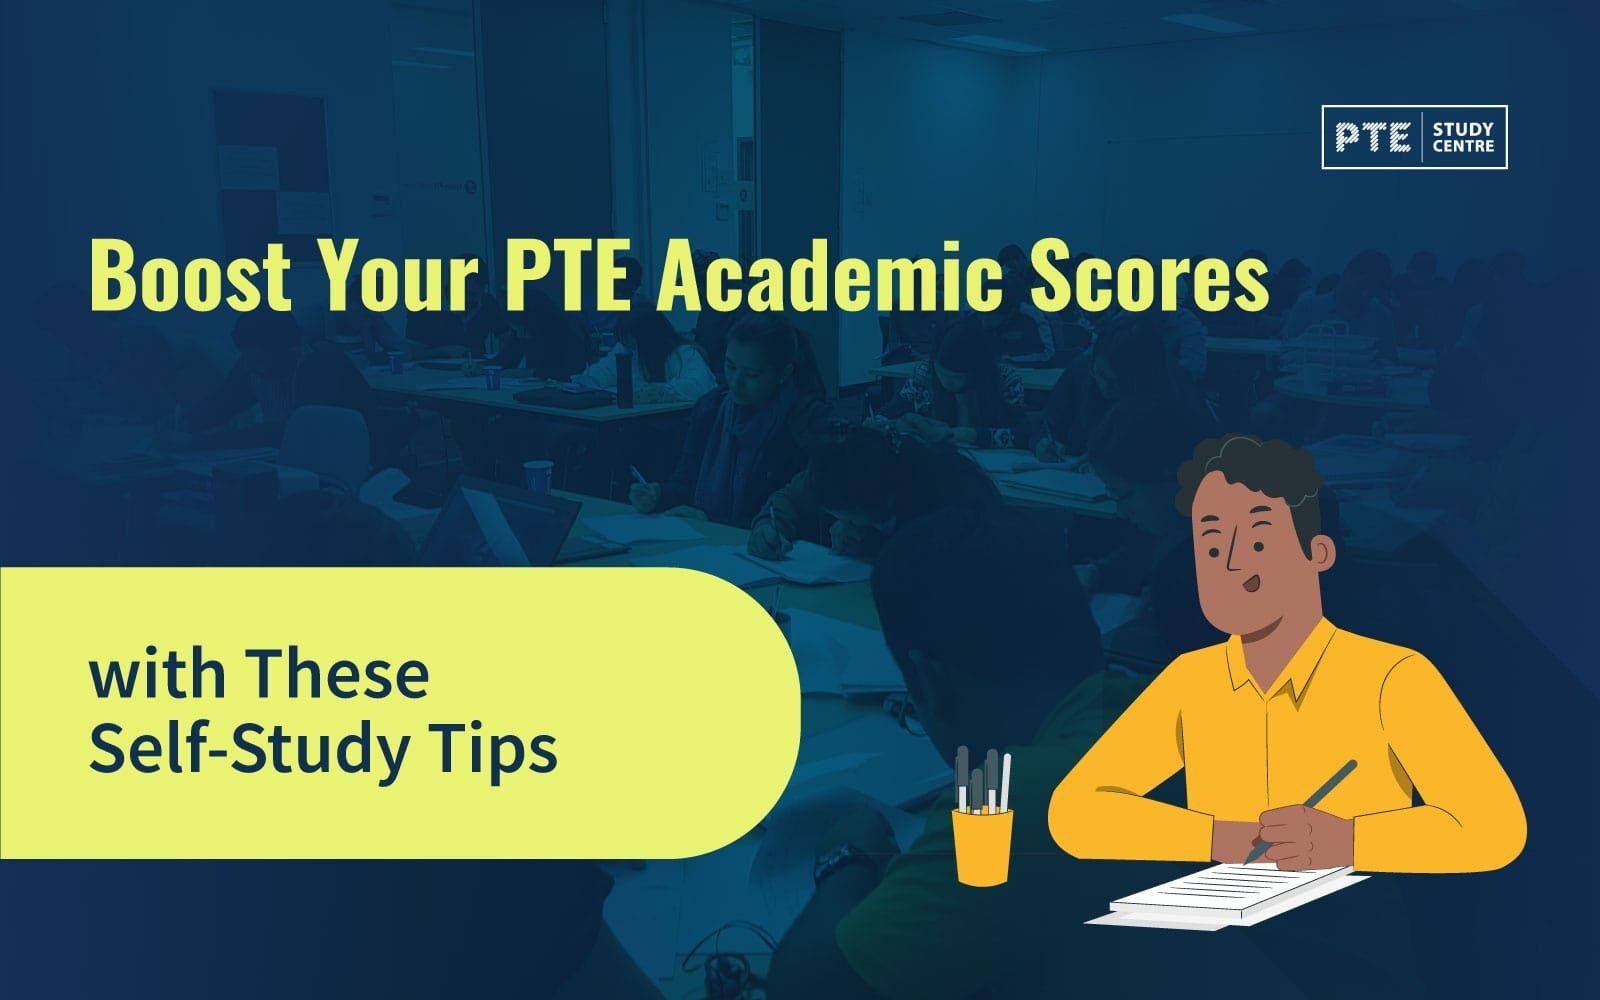 Boost Your PTE Academic Scores with These Self-Study Tips